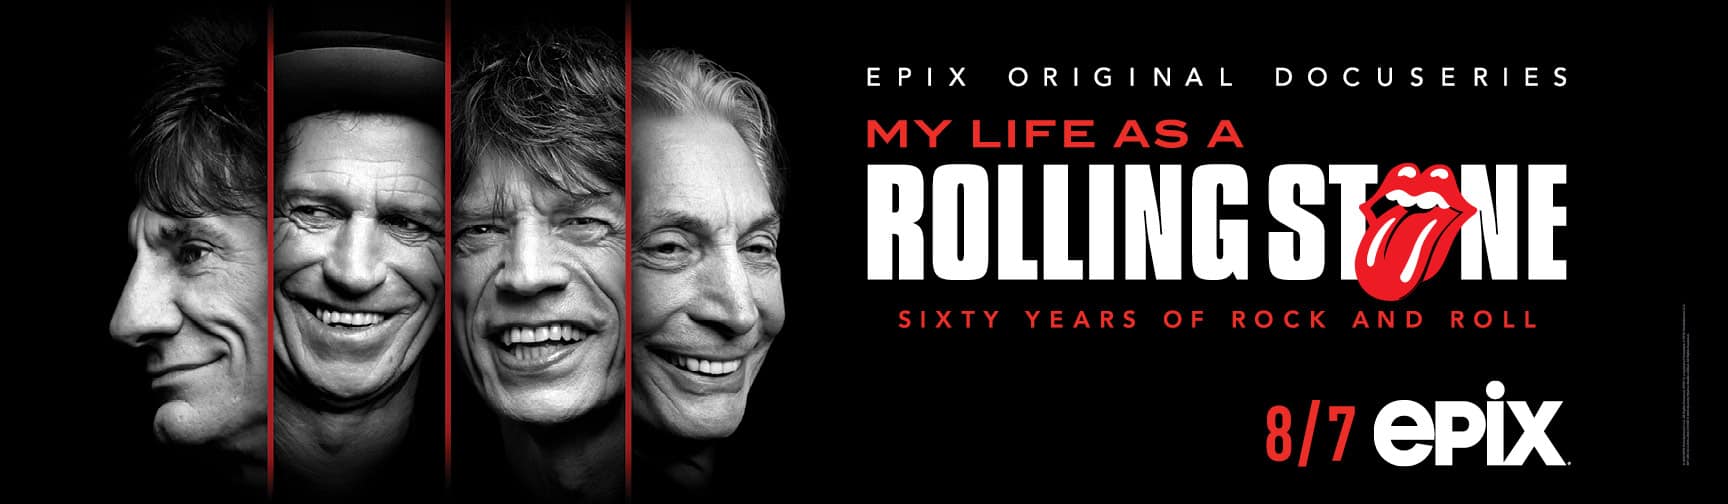 My Life As A Rolling Stone 1st trailer ahead of EPIX premiere 2